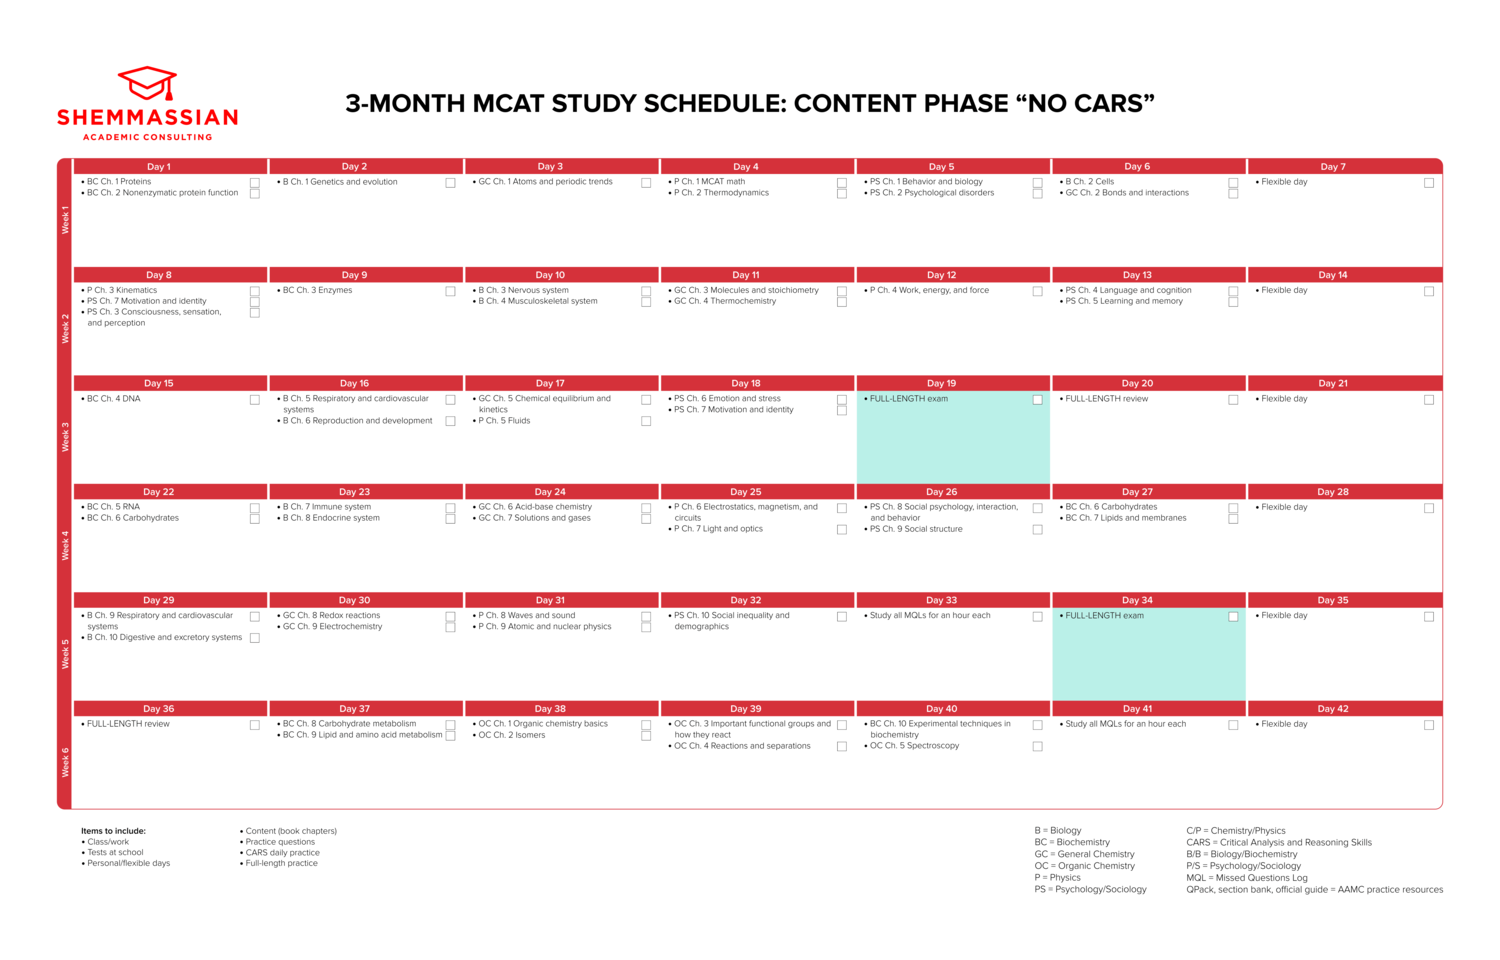 mcat study schedule Template (3 months): Content phase (WITHOUT CARS)